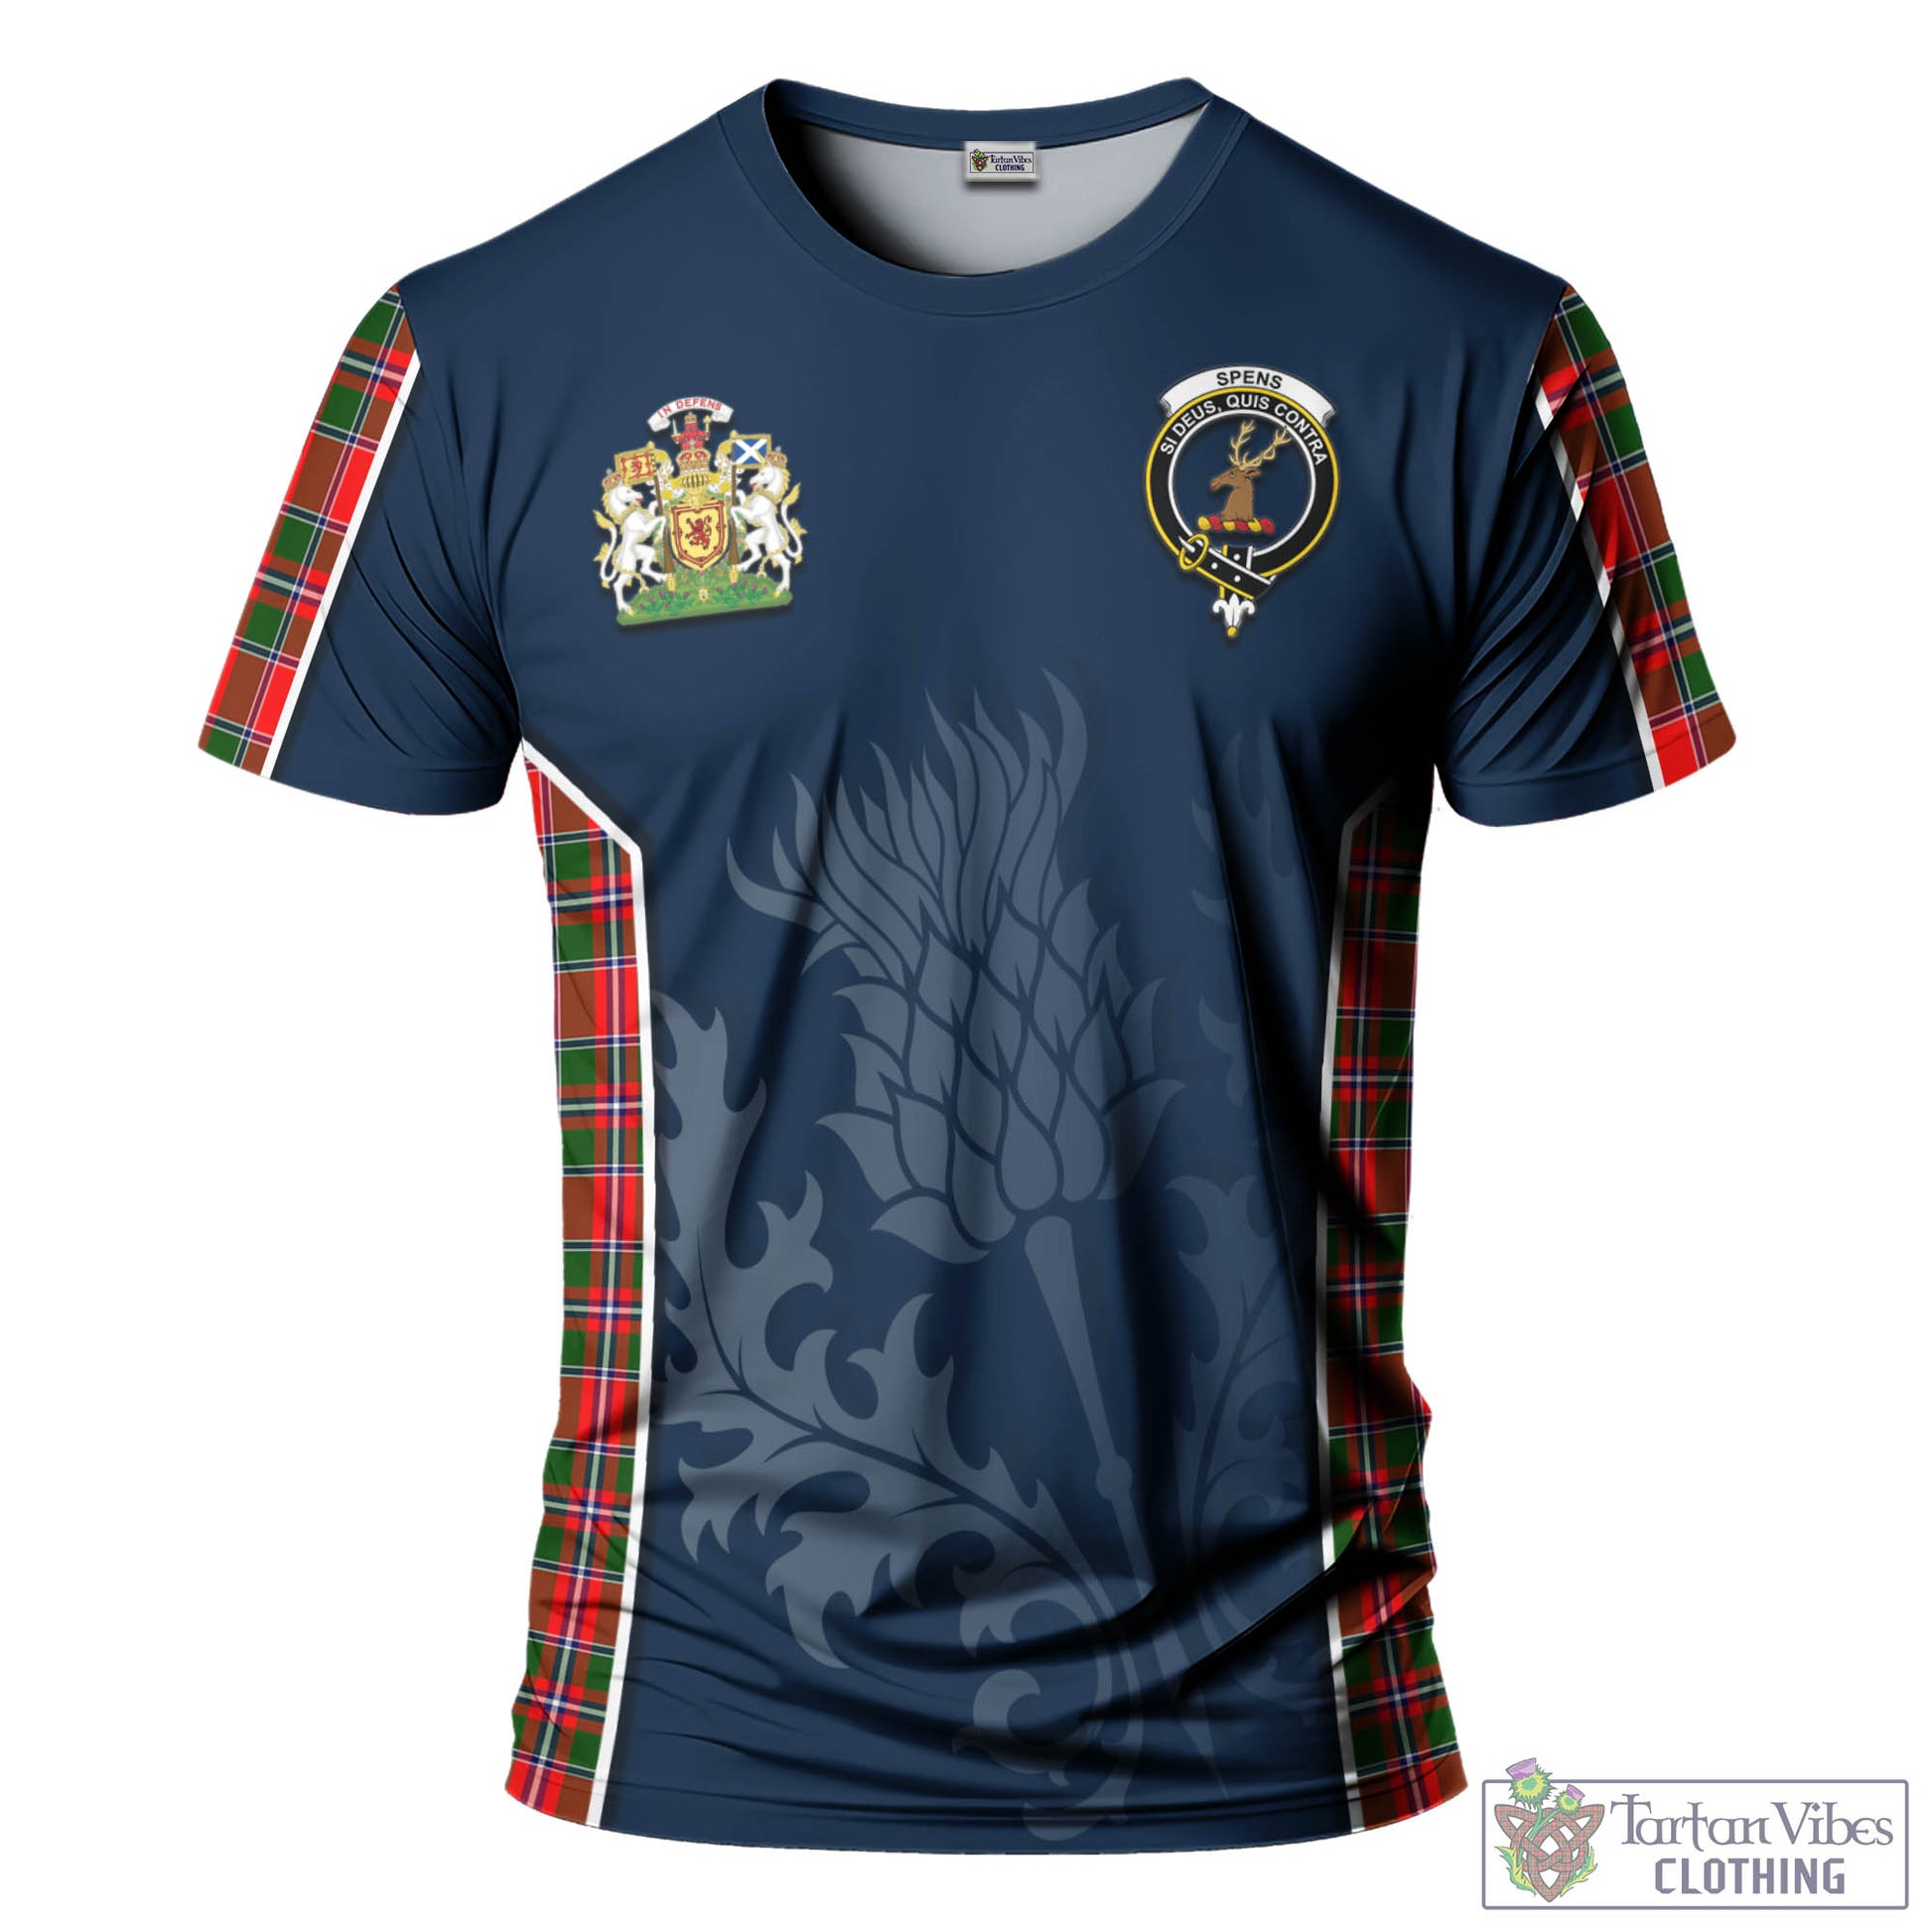 Tartan Vibes Clothing Spens Modern Tartan T-Shirt with Family Crest and Scottish Thistle Vibes Sport Style